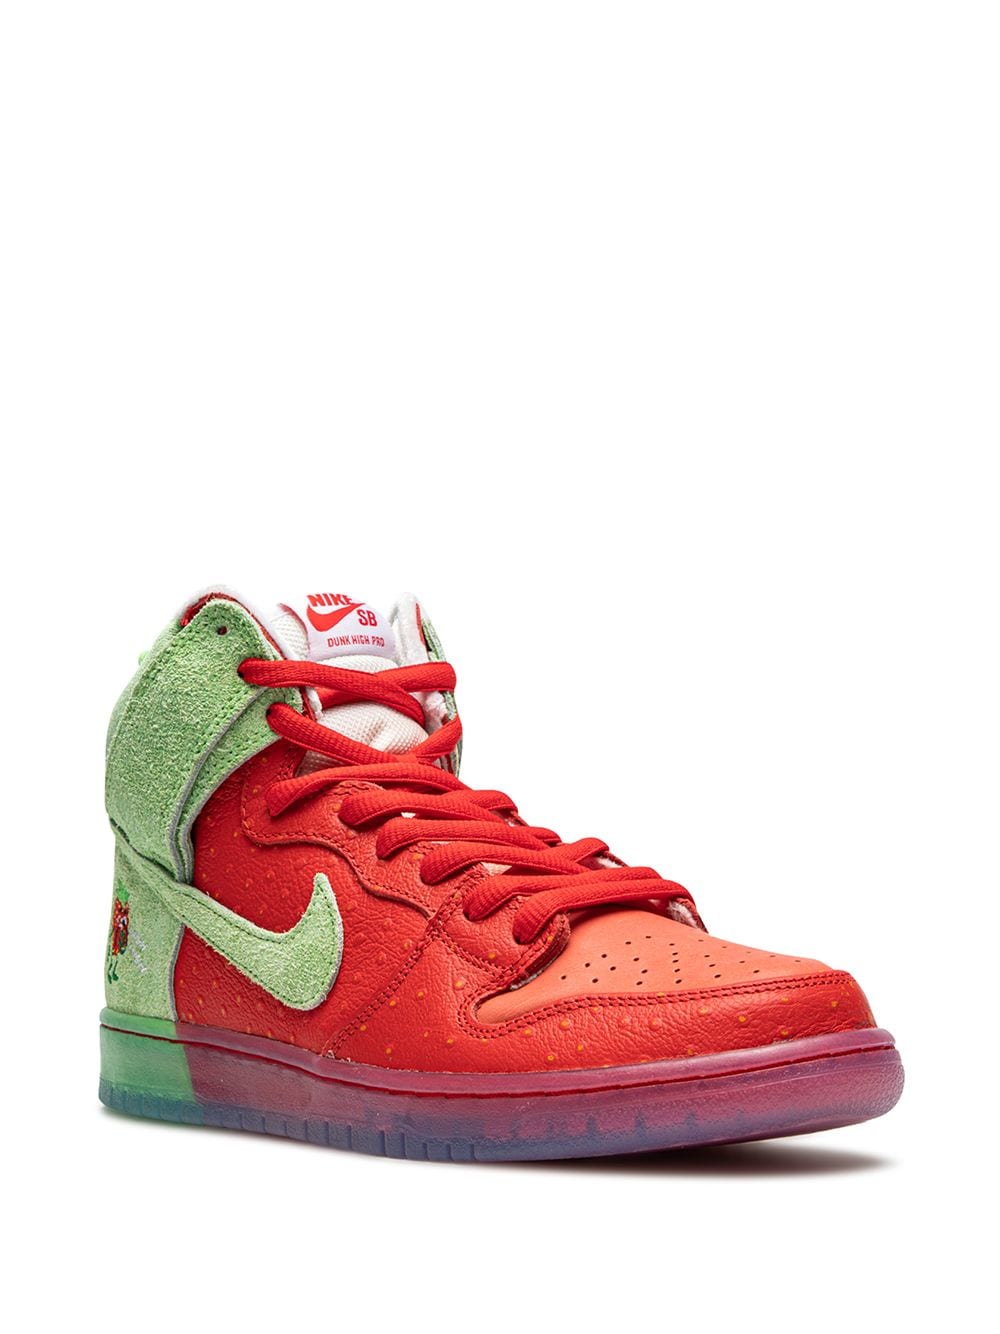 NIKE SB DUNK HIGH STRAWBERRY COUGH CW7093-600 sneakmarks